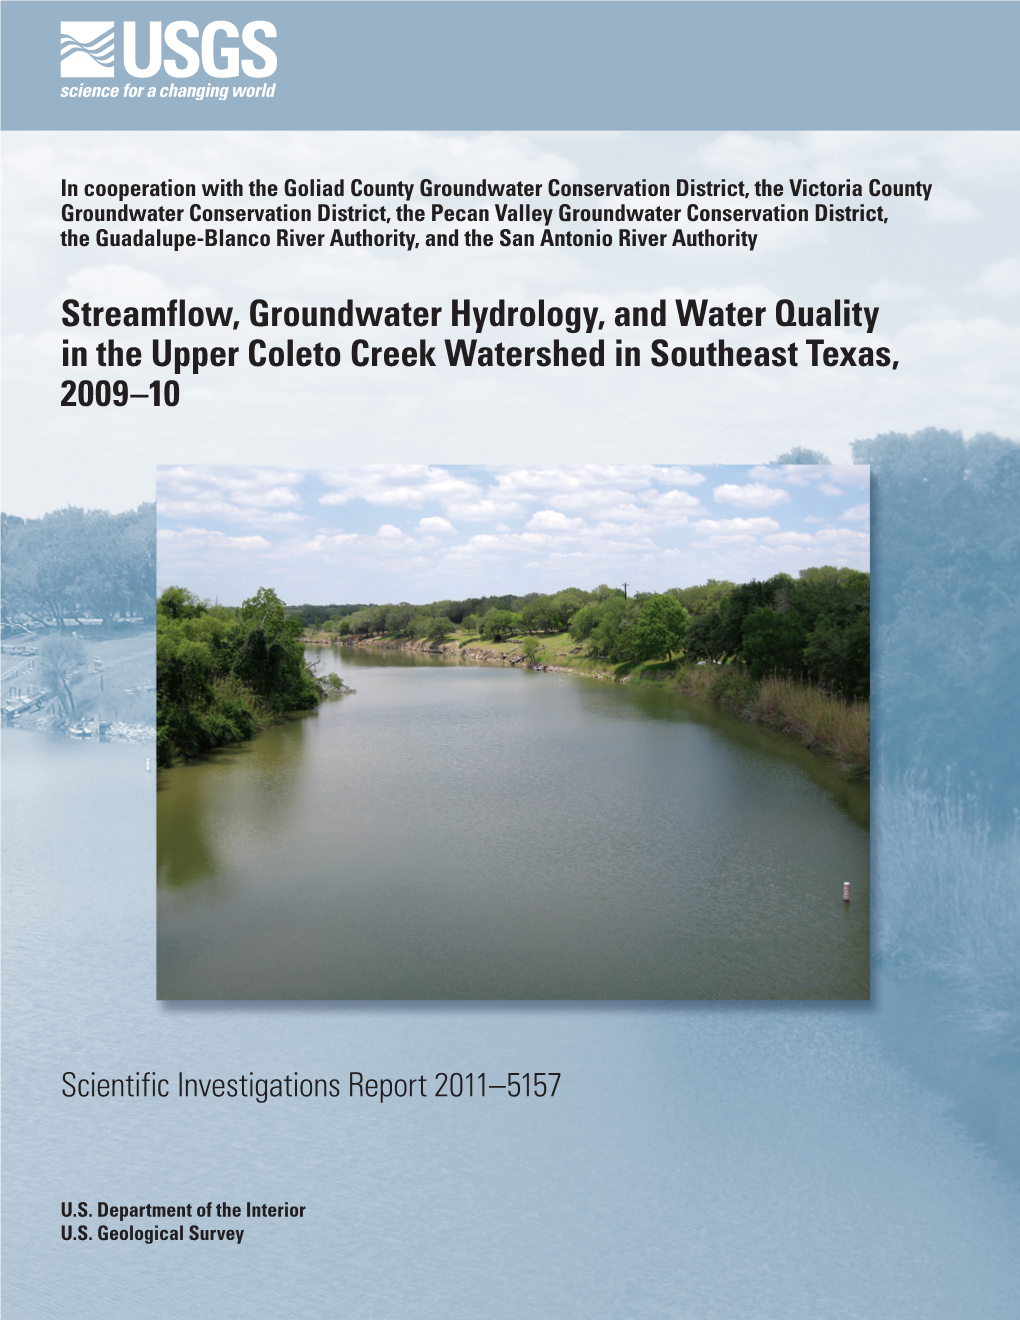 Streamflow, Groundwater Hydrology, and Water Quality in the Upper Coleto Creek Watershed in Southeast Texas, 2009–10